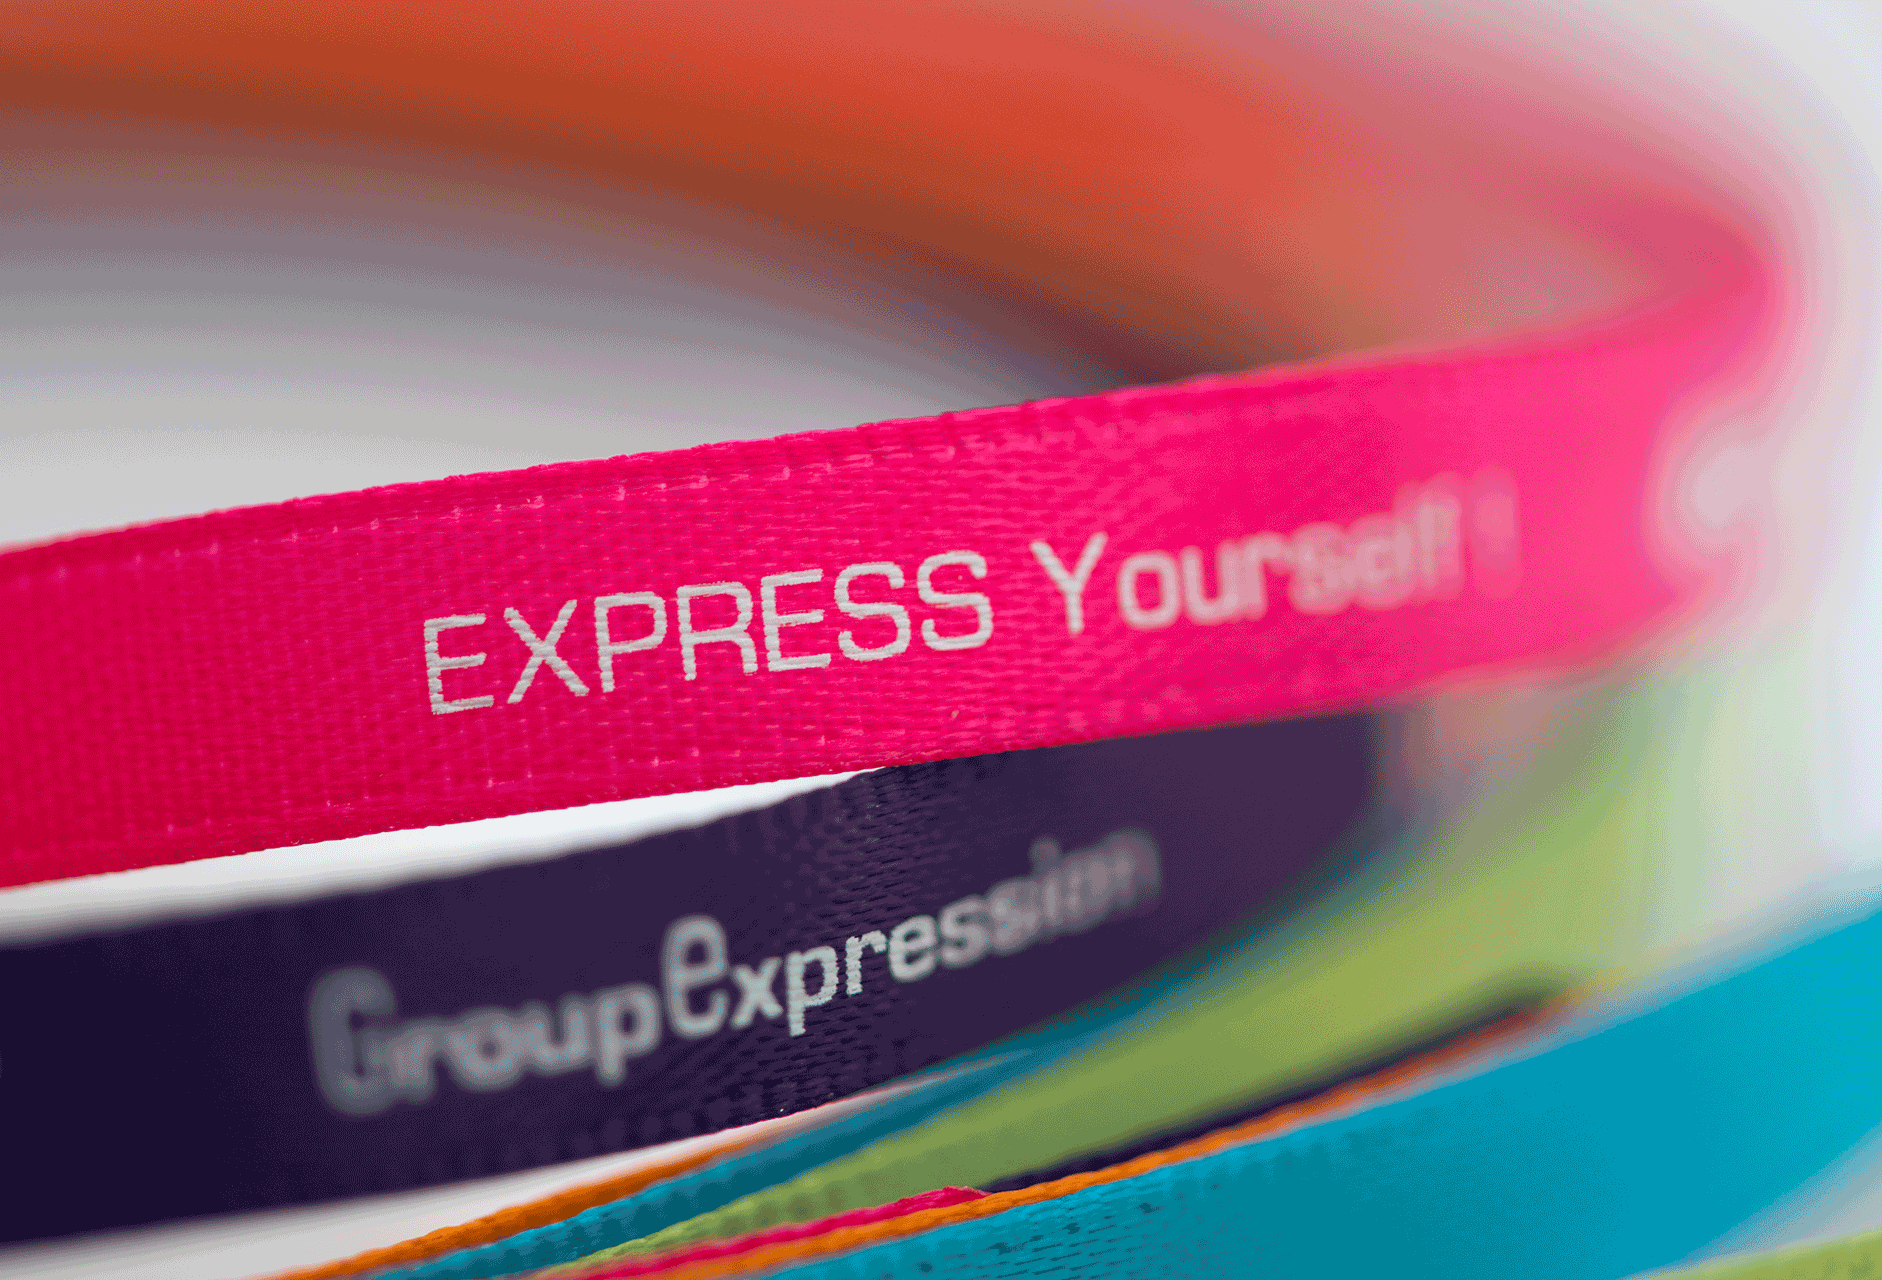 EXPRESSION VOYAGES